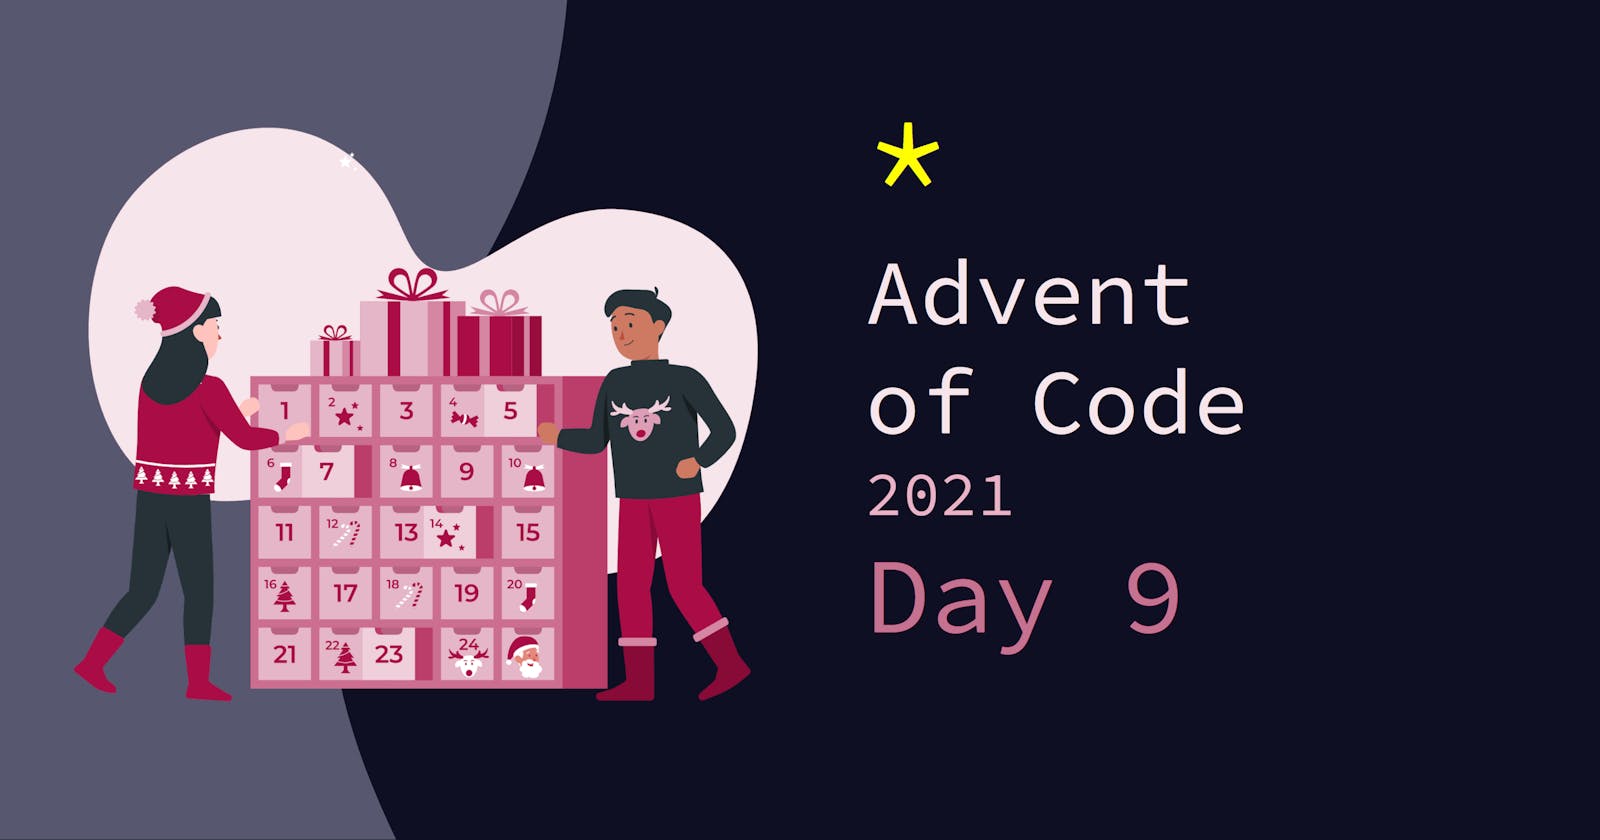 Advent of Code 2021: Day 9